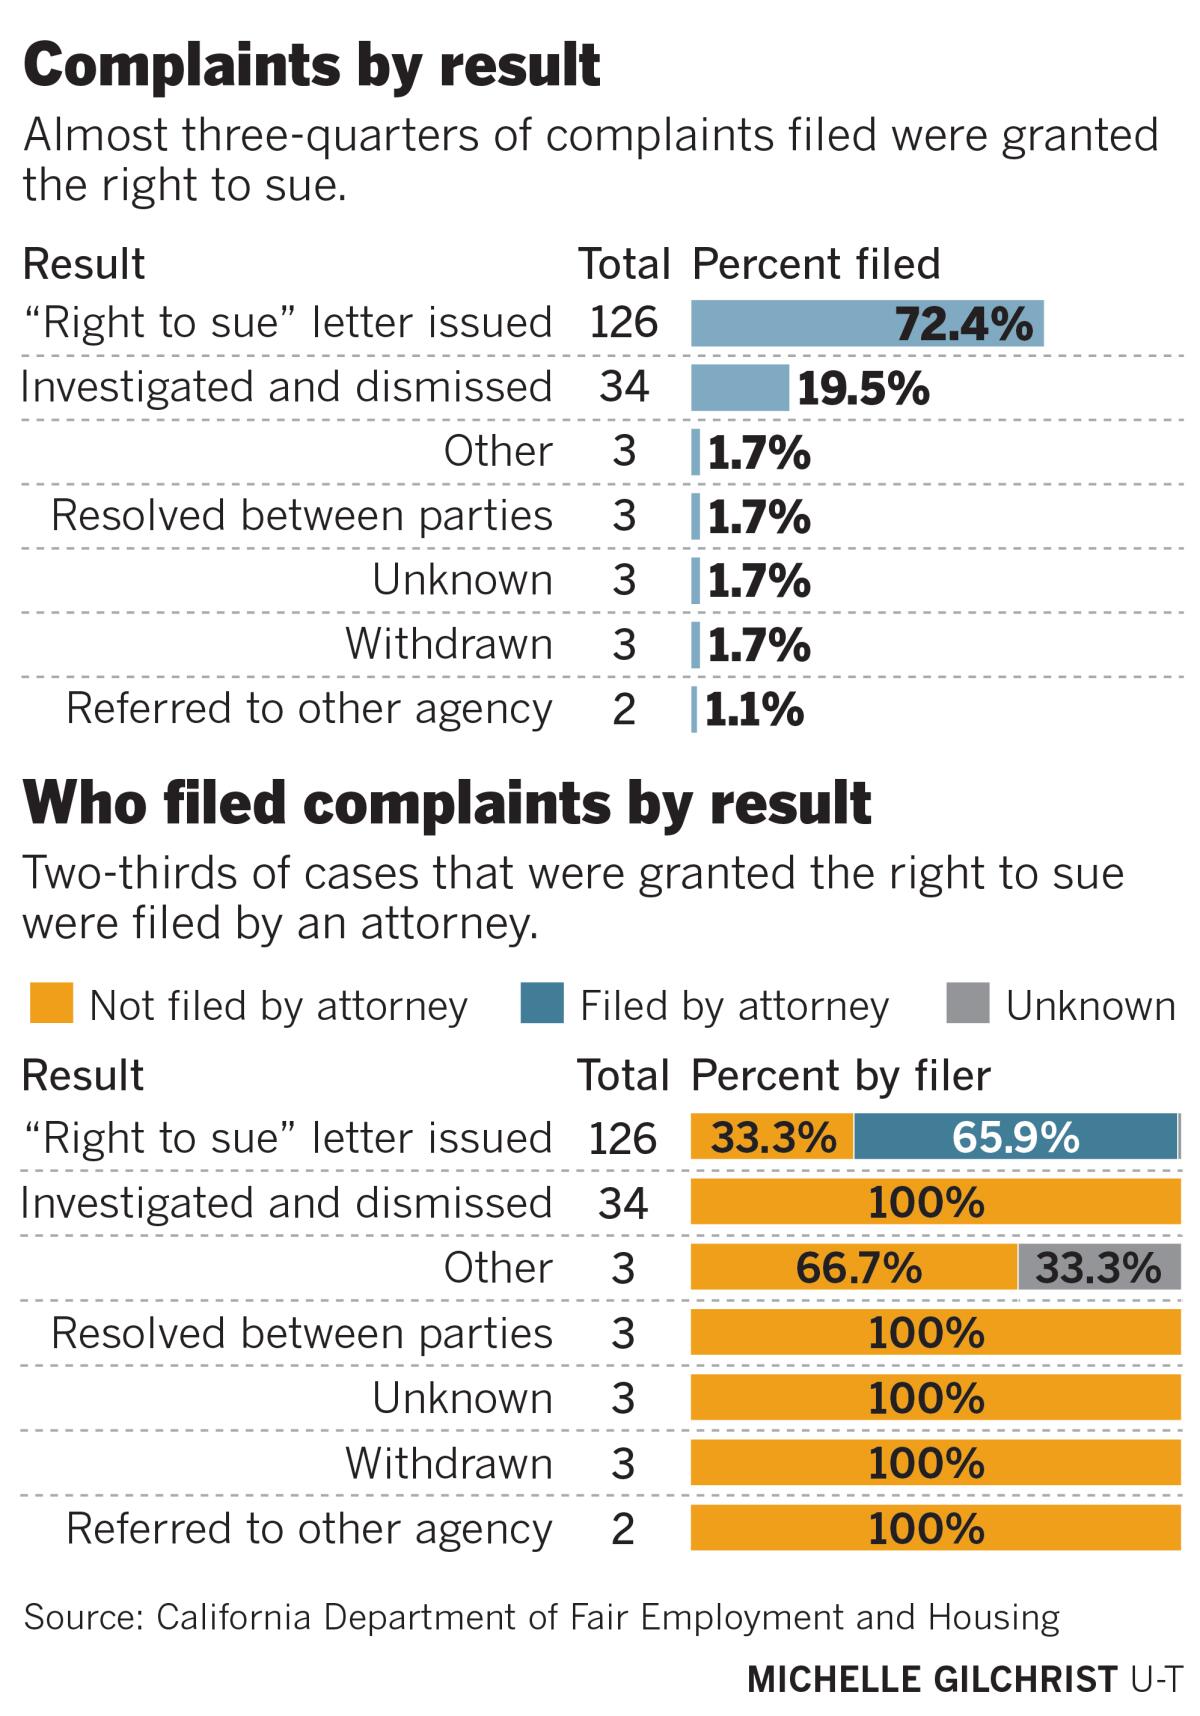 Complaints by result; who filed complaints by result